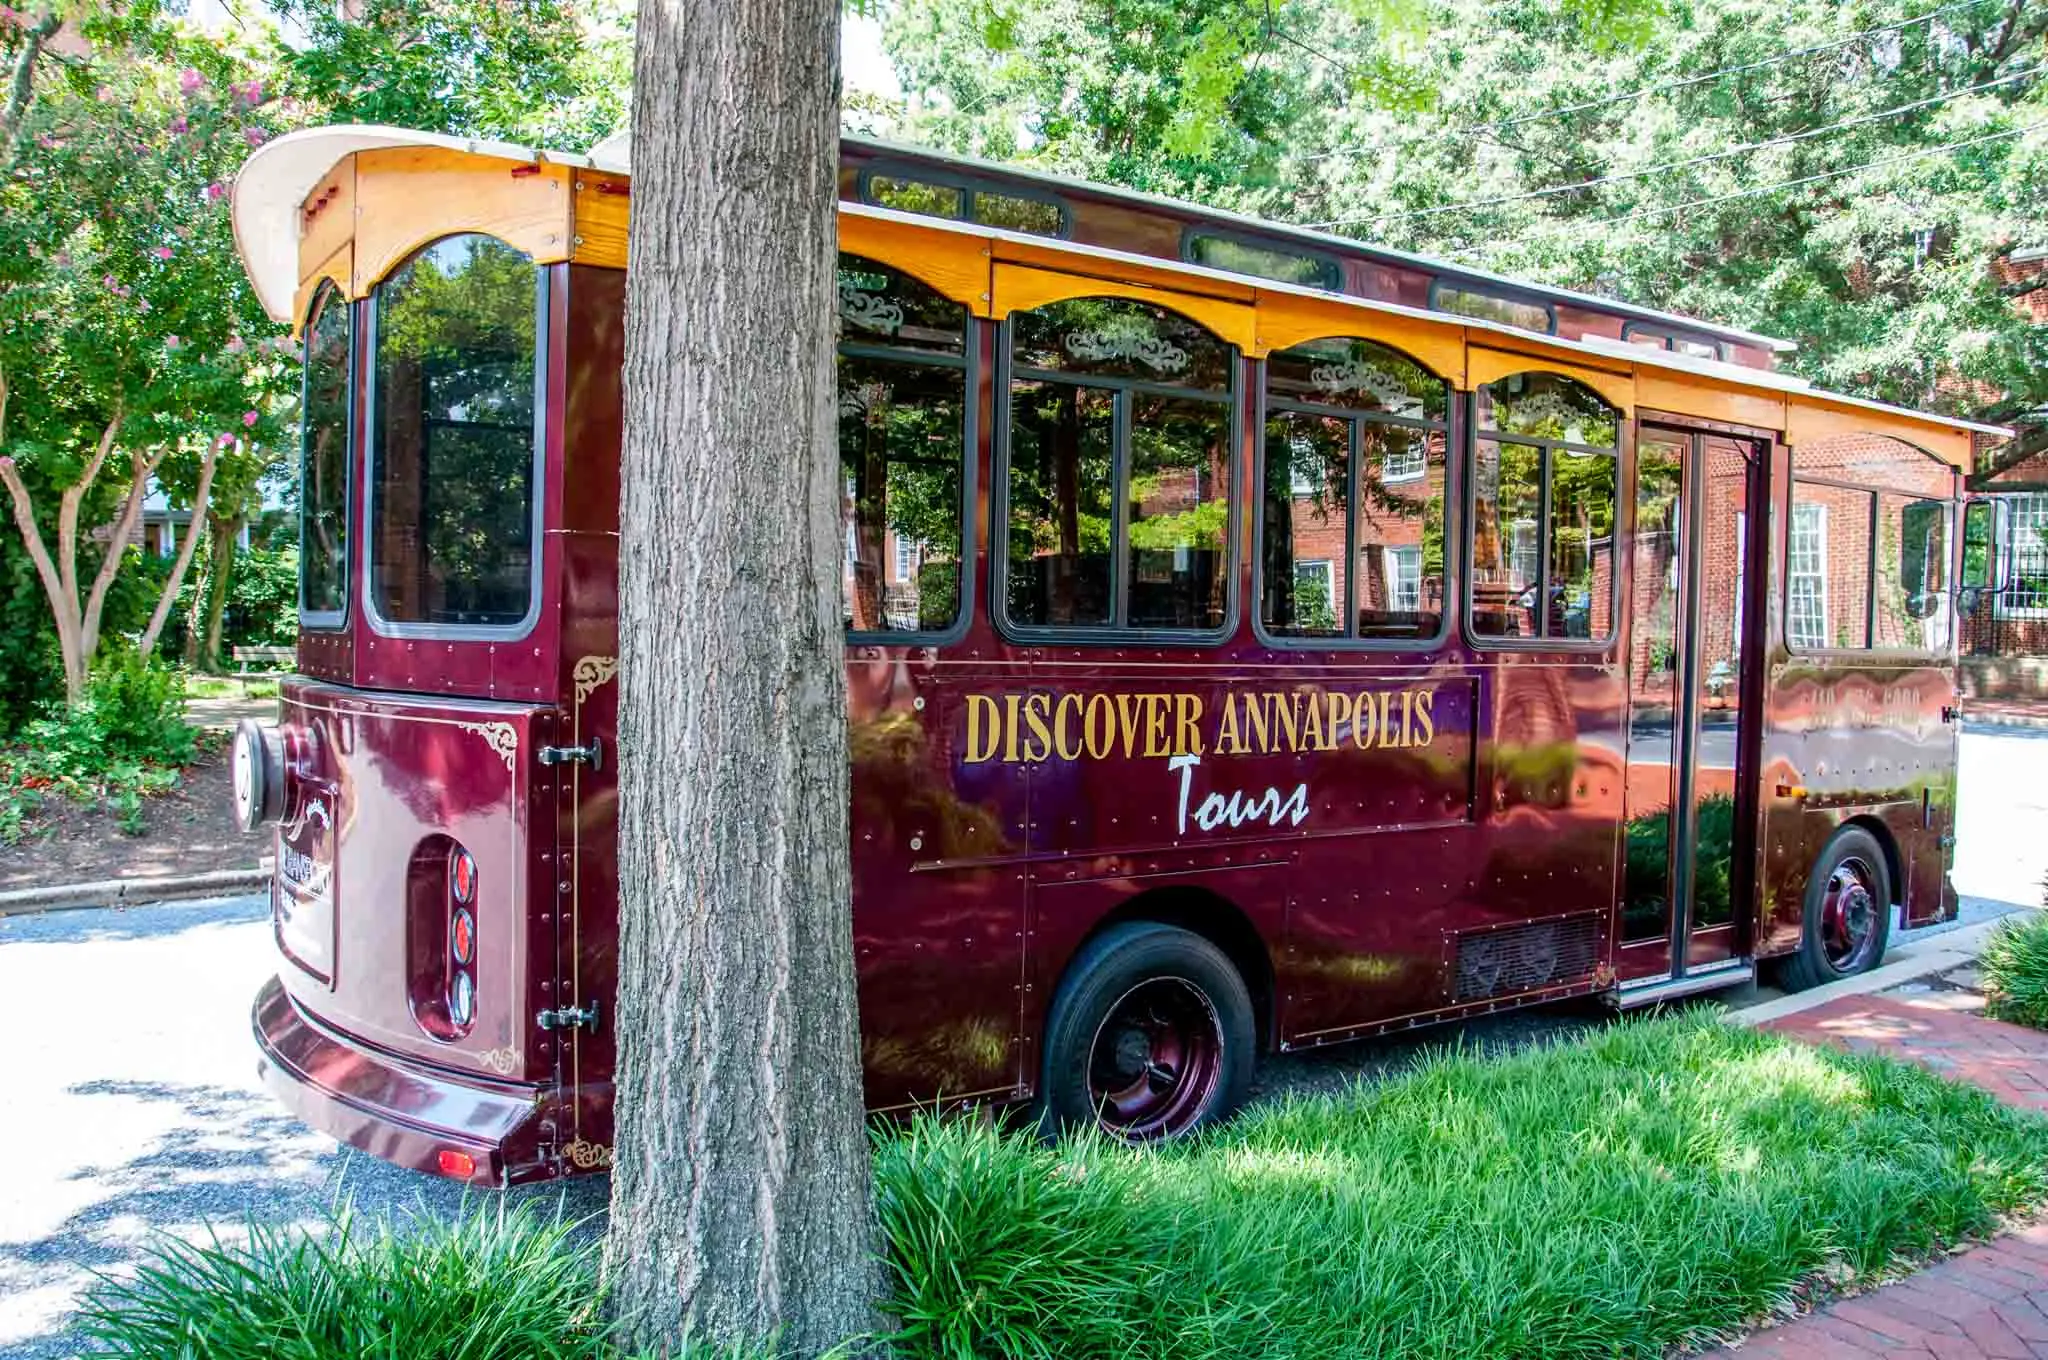 Red trolley car with "Discover Annapolis Tours" written on the side.